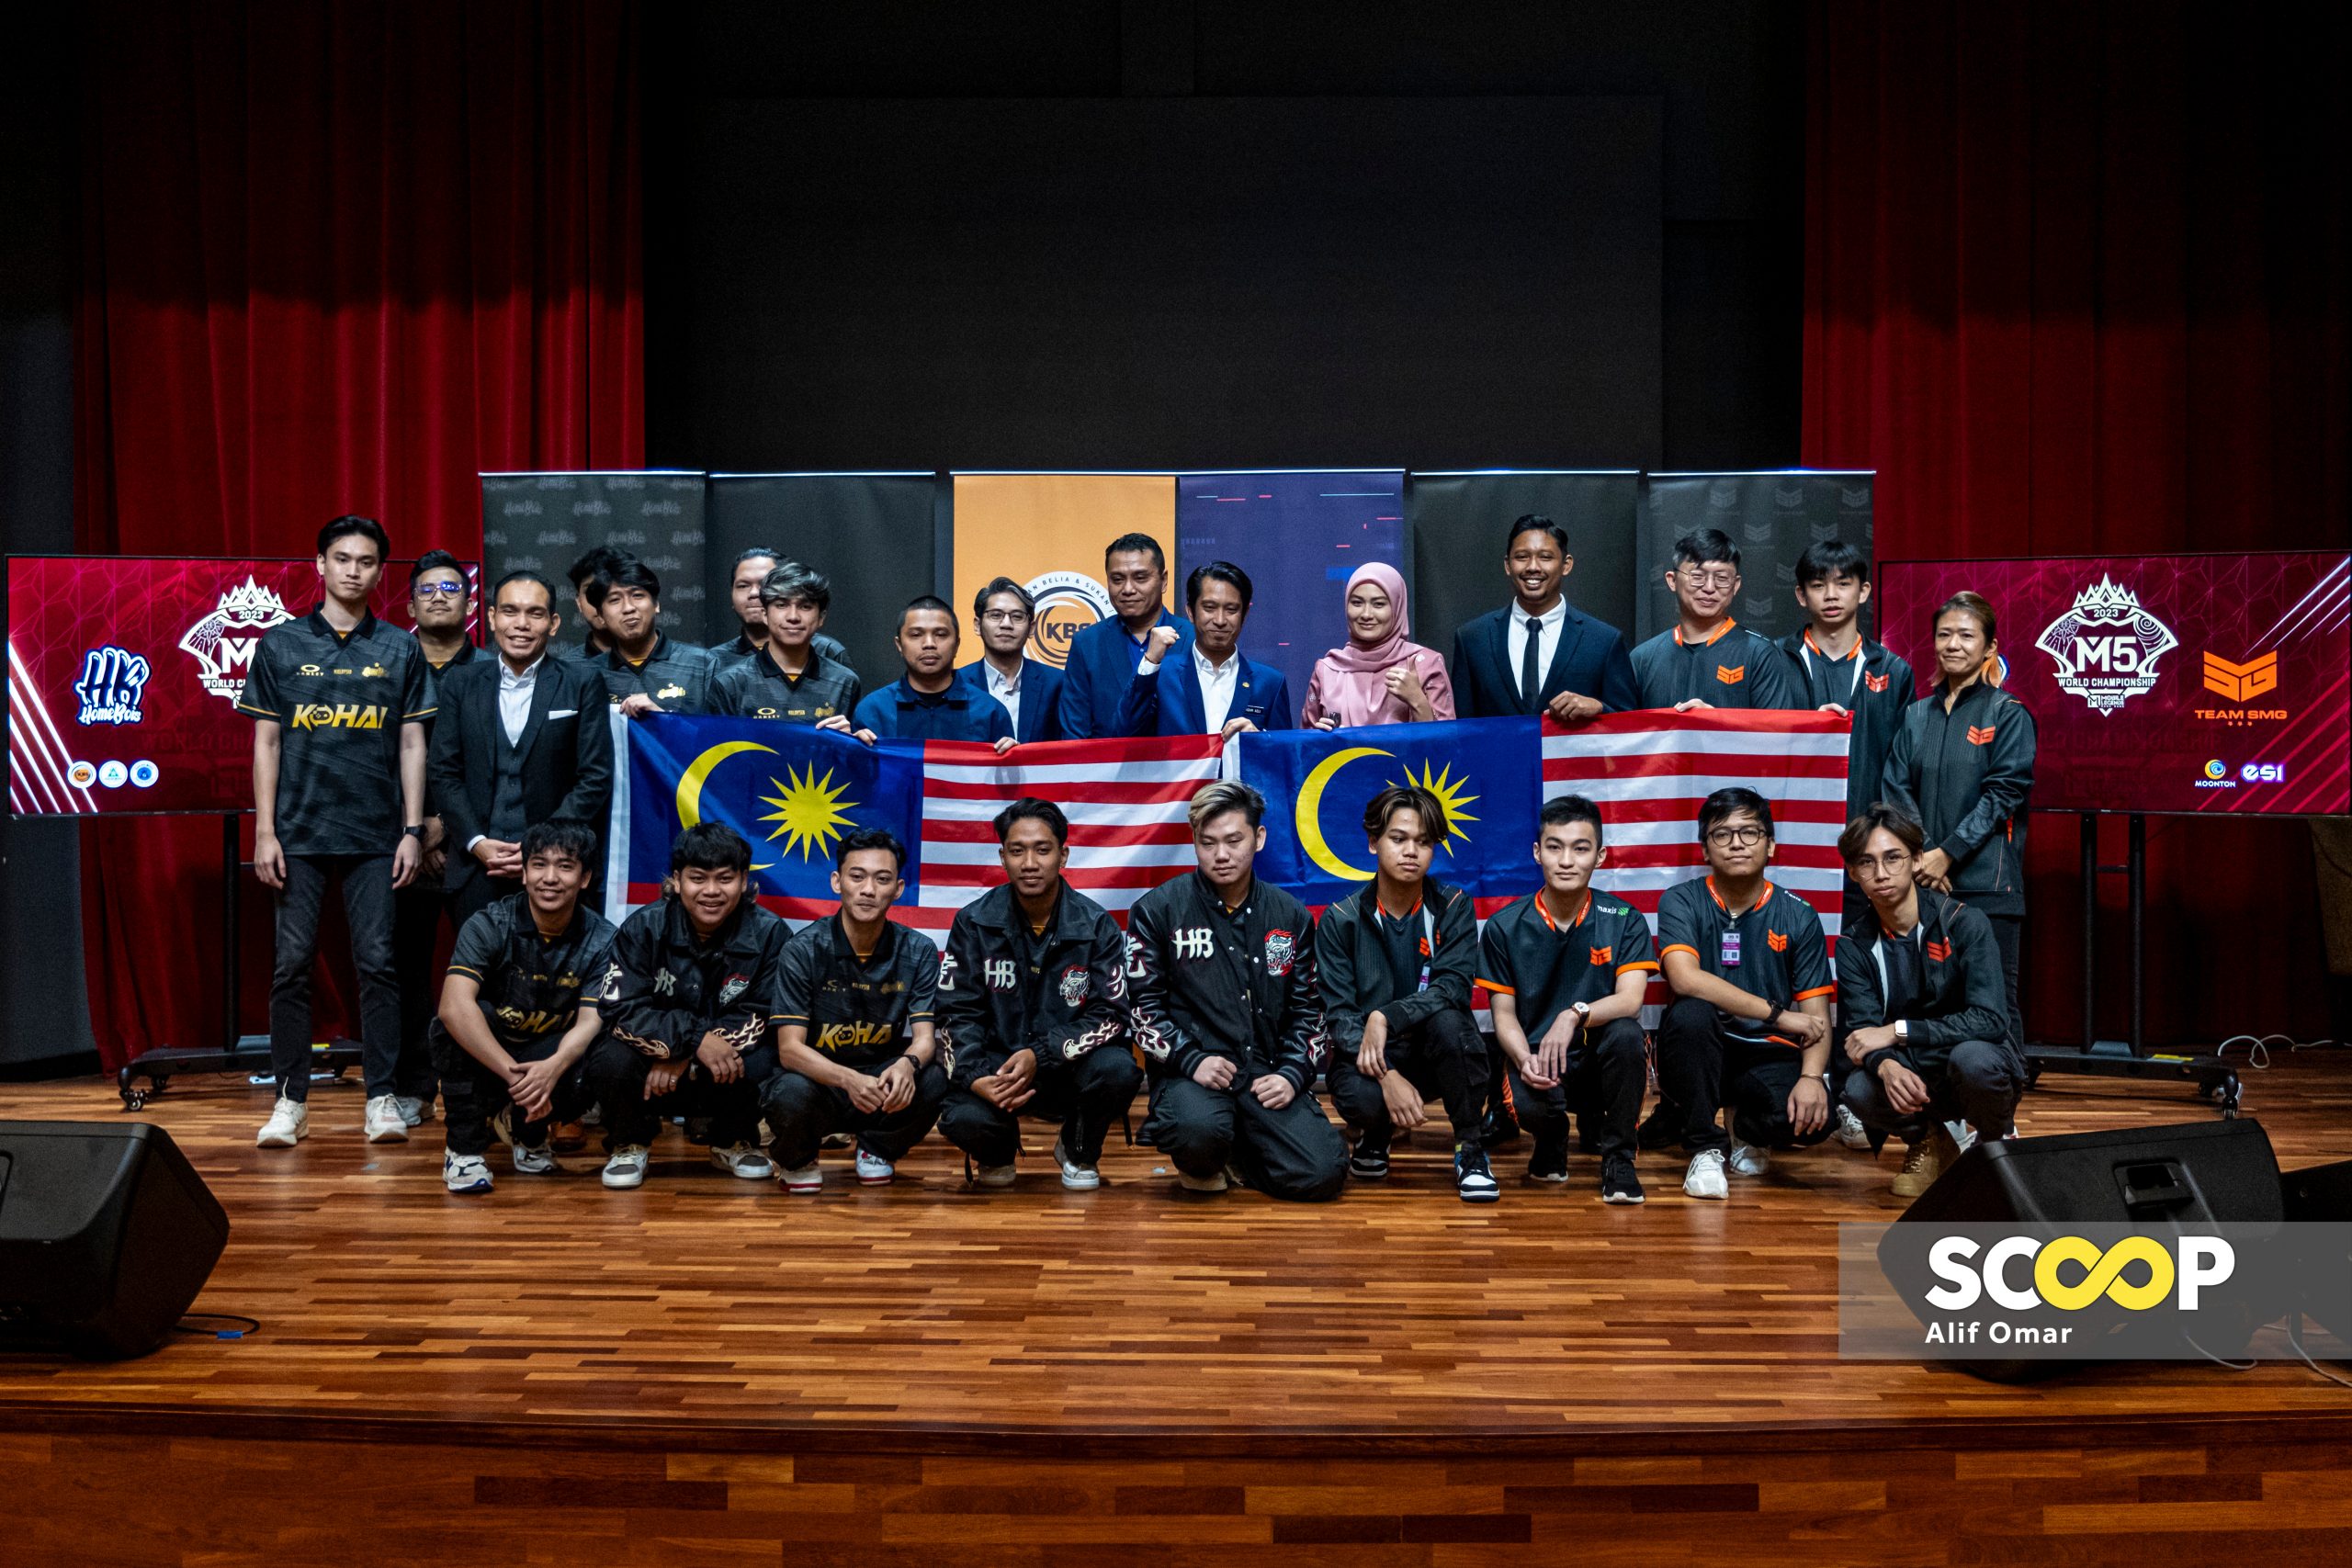 Malaysia’s Mobile Legends teams set differing goals at M5 World Championships